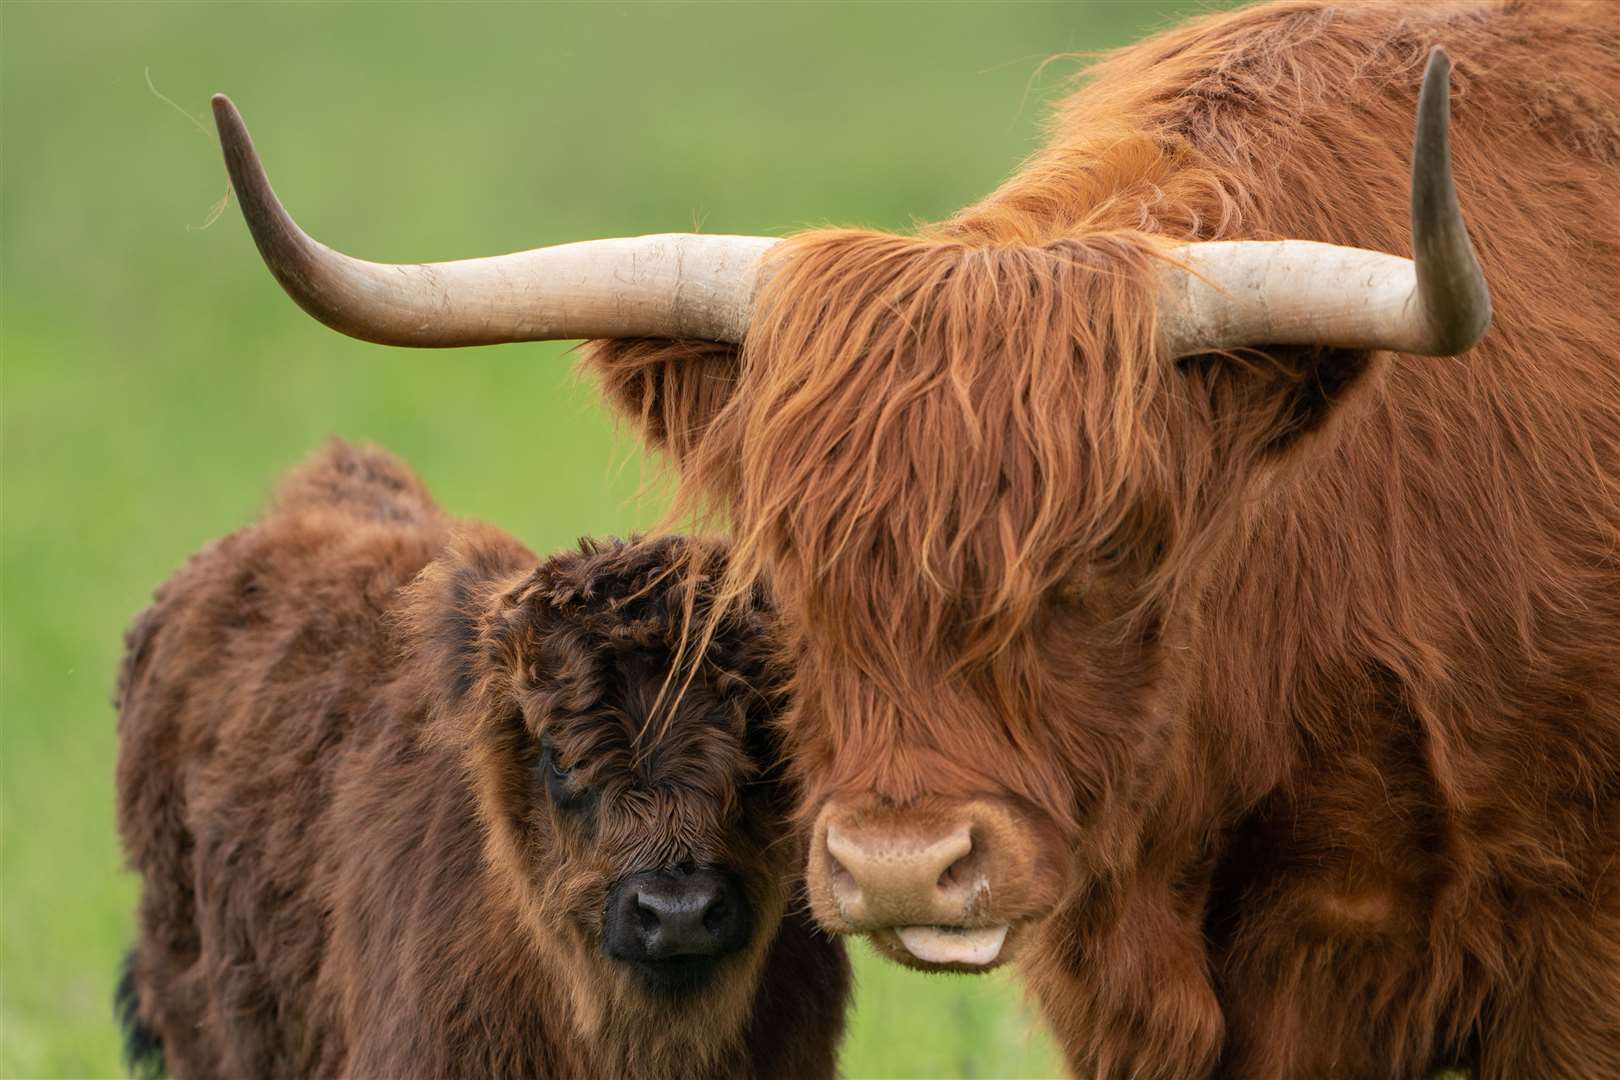 Highland cow Apple with her calf Malin at the National Trust’s Wicken Fen nature reserve in Cambridgeshire, where their grazing will help create habitats for other species (Joe Giddens/PA)